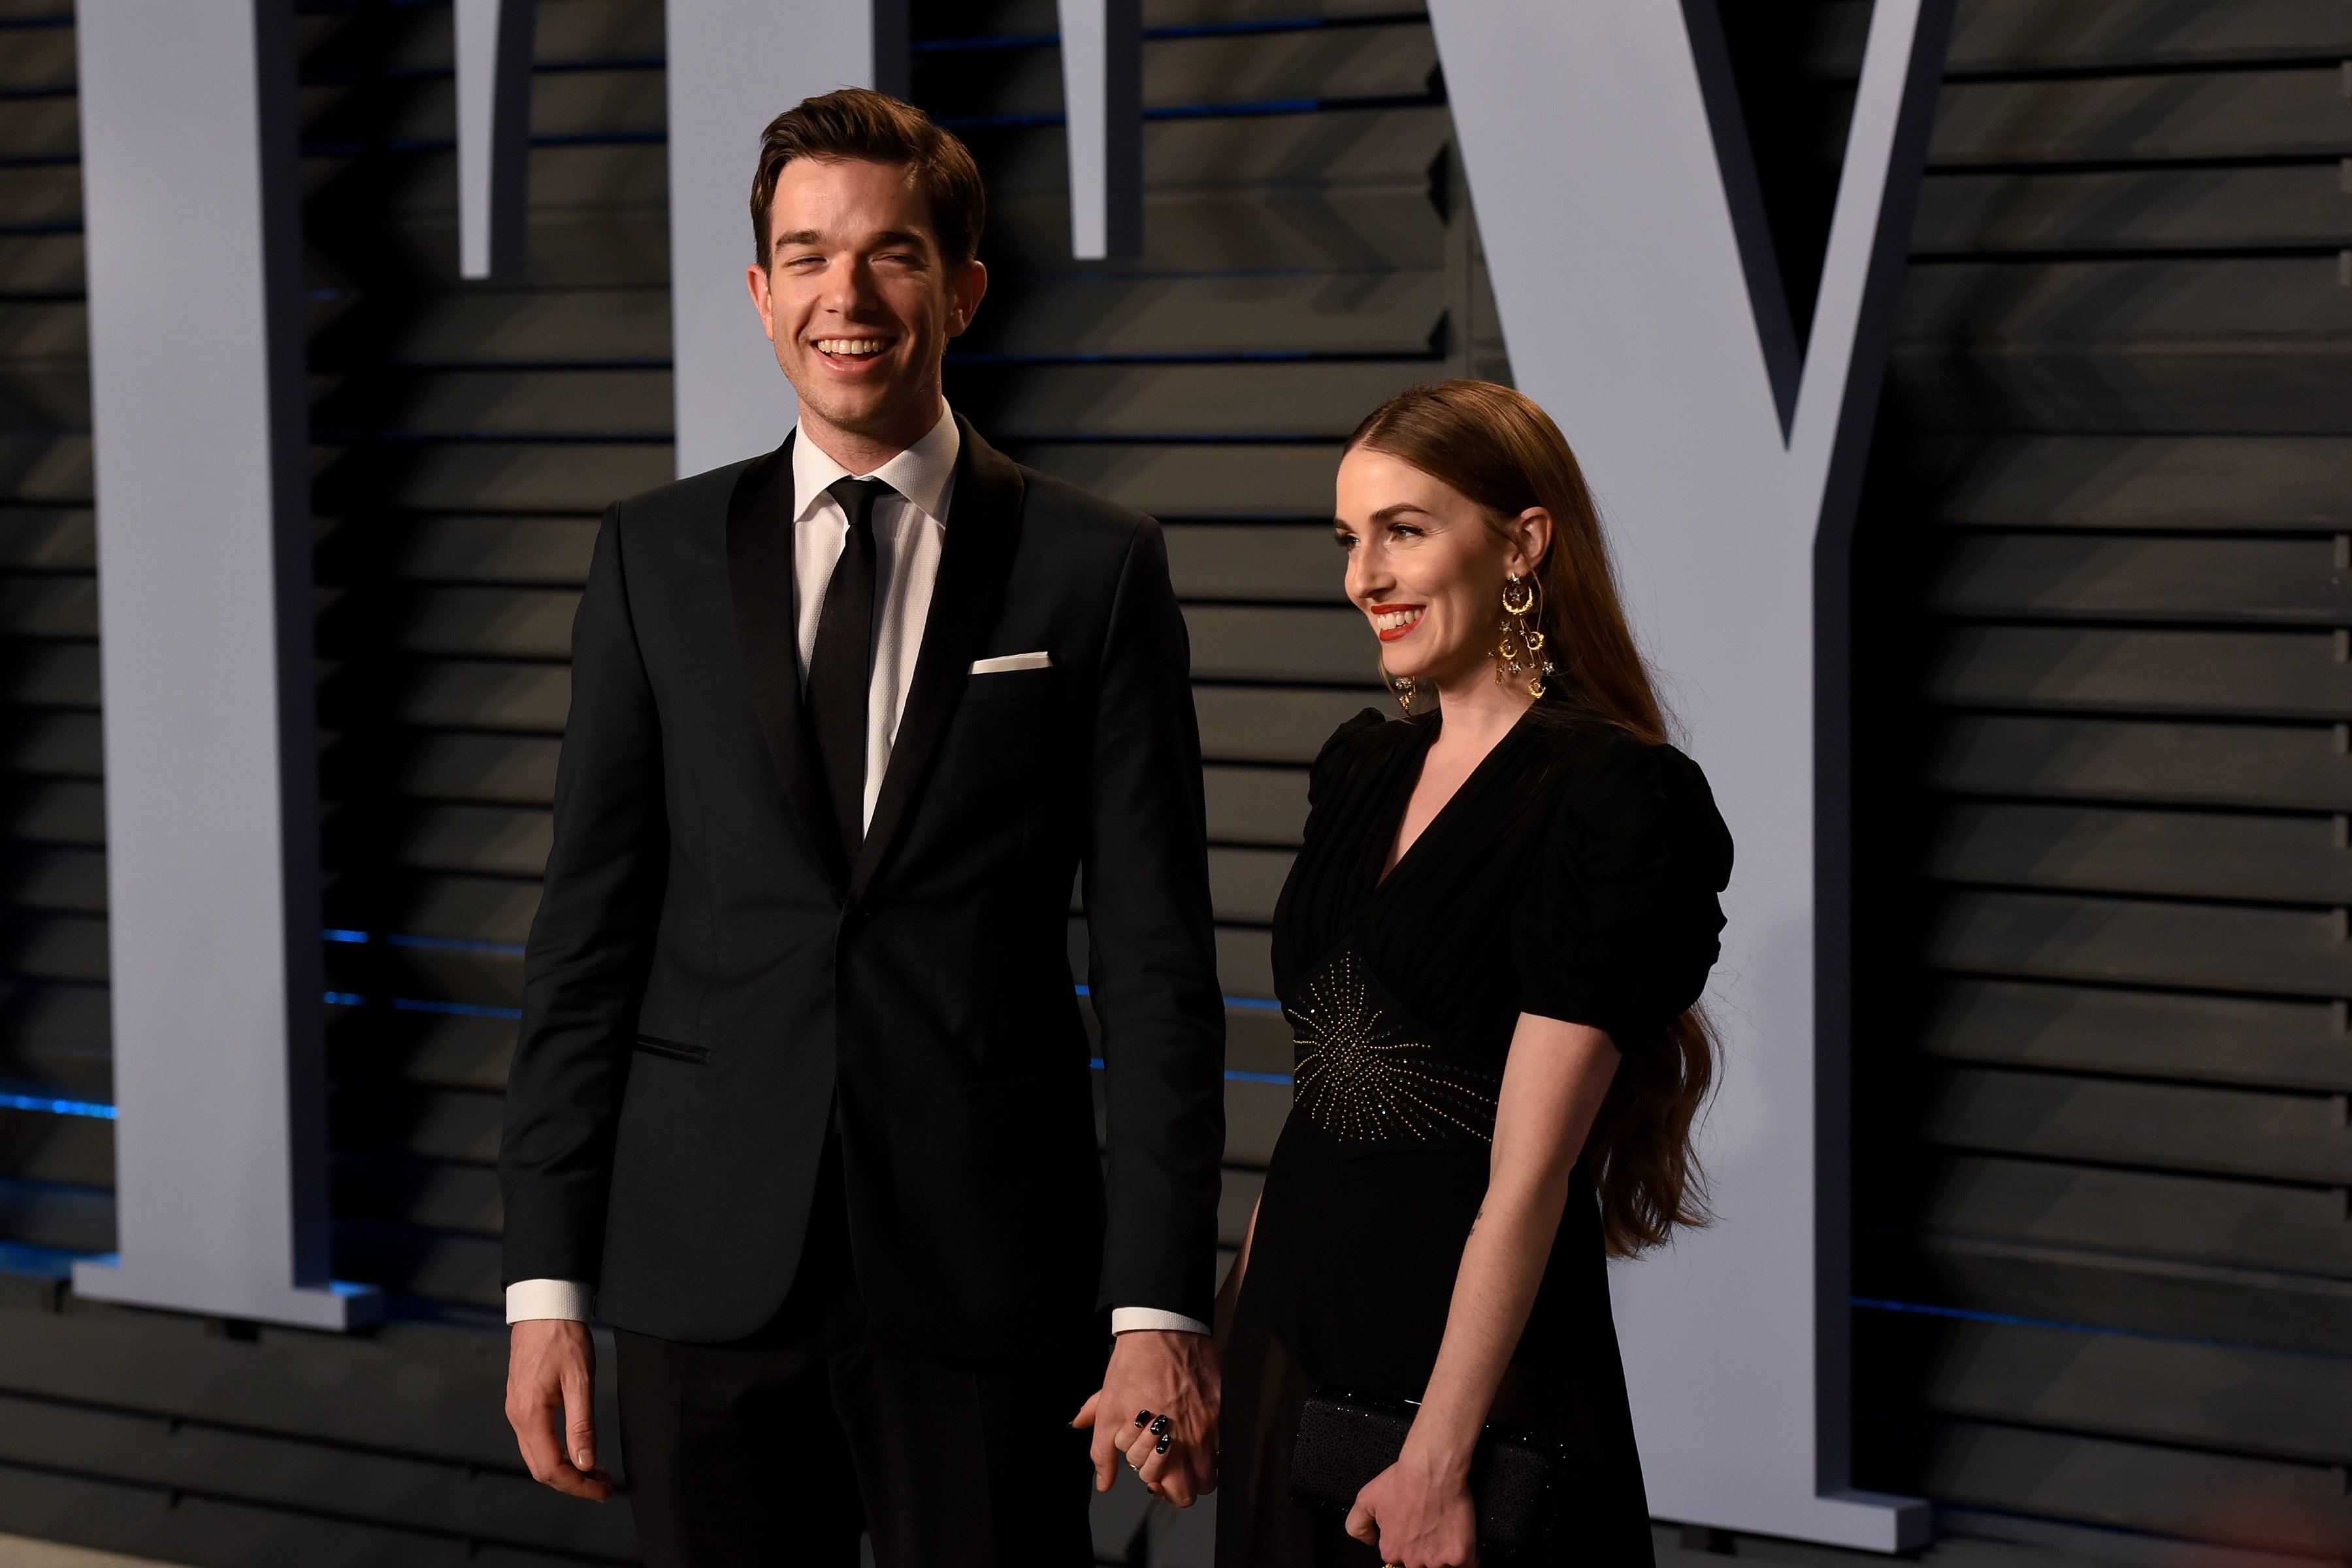 John Mulaney and Annamarie Tendler pose for photos before heading incie to the 2018 Vanity Fiar Oscar Party